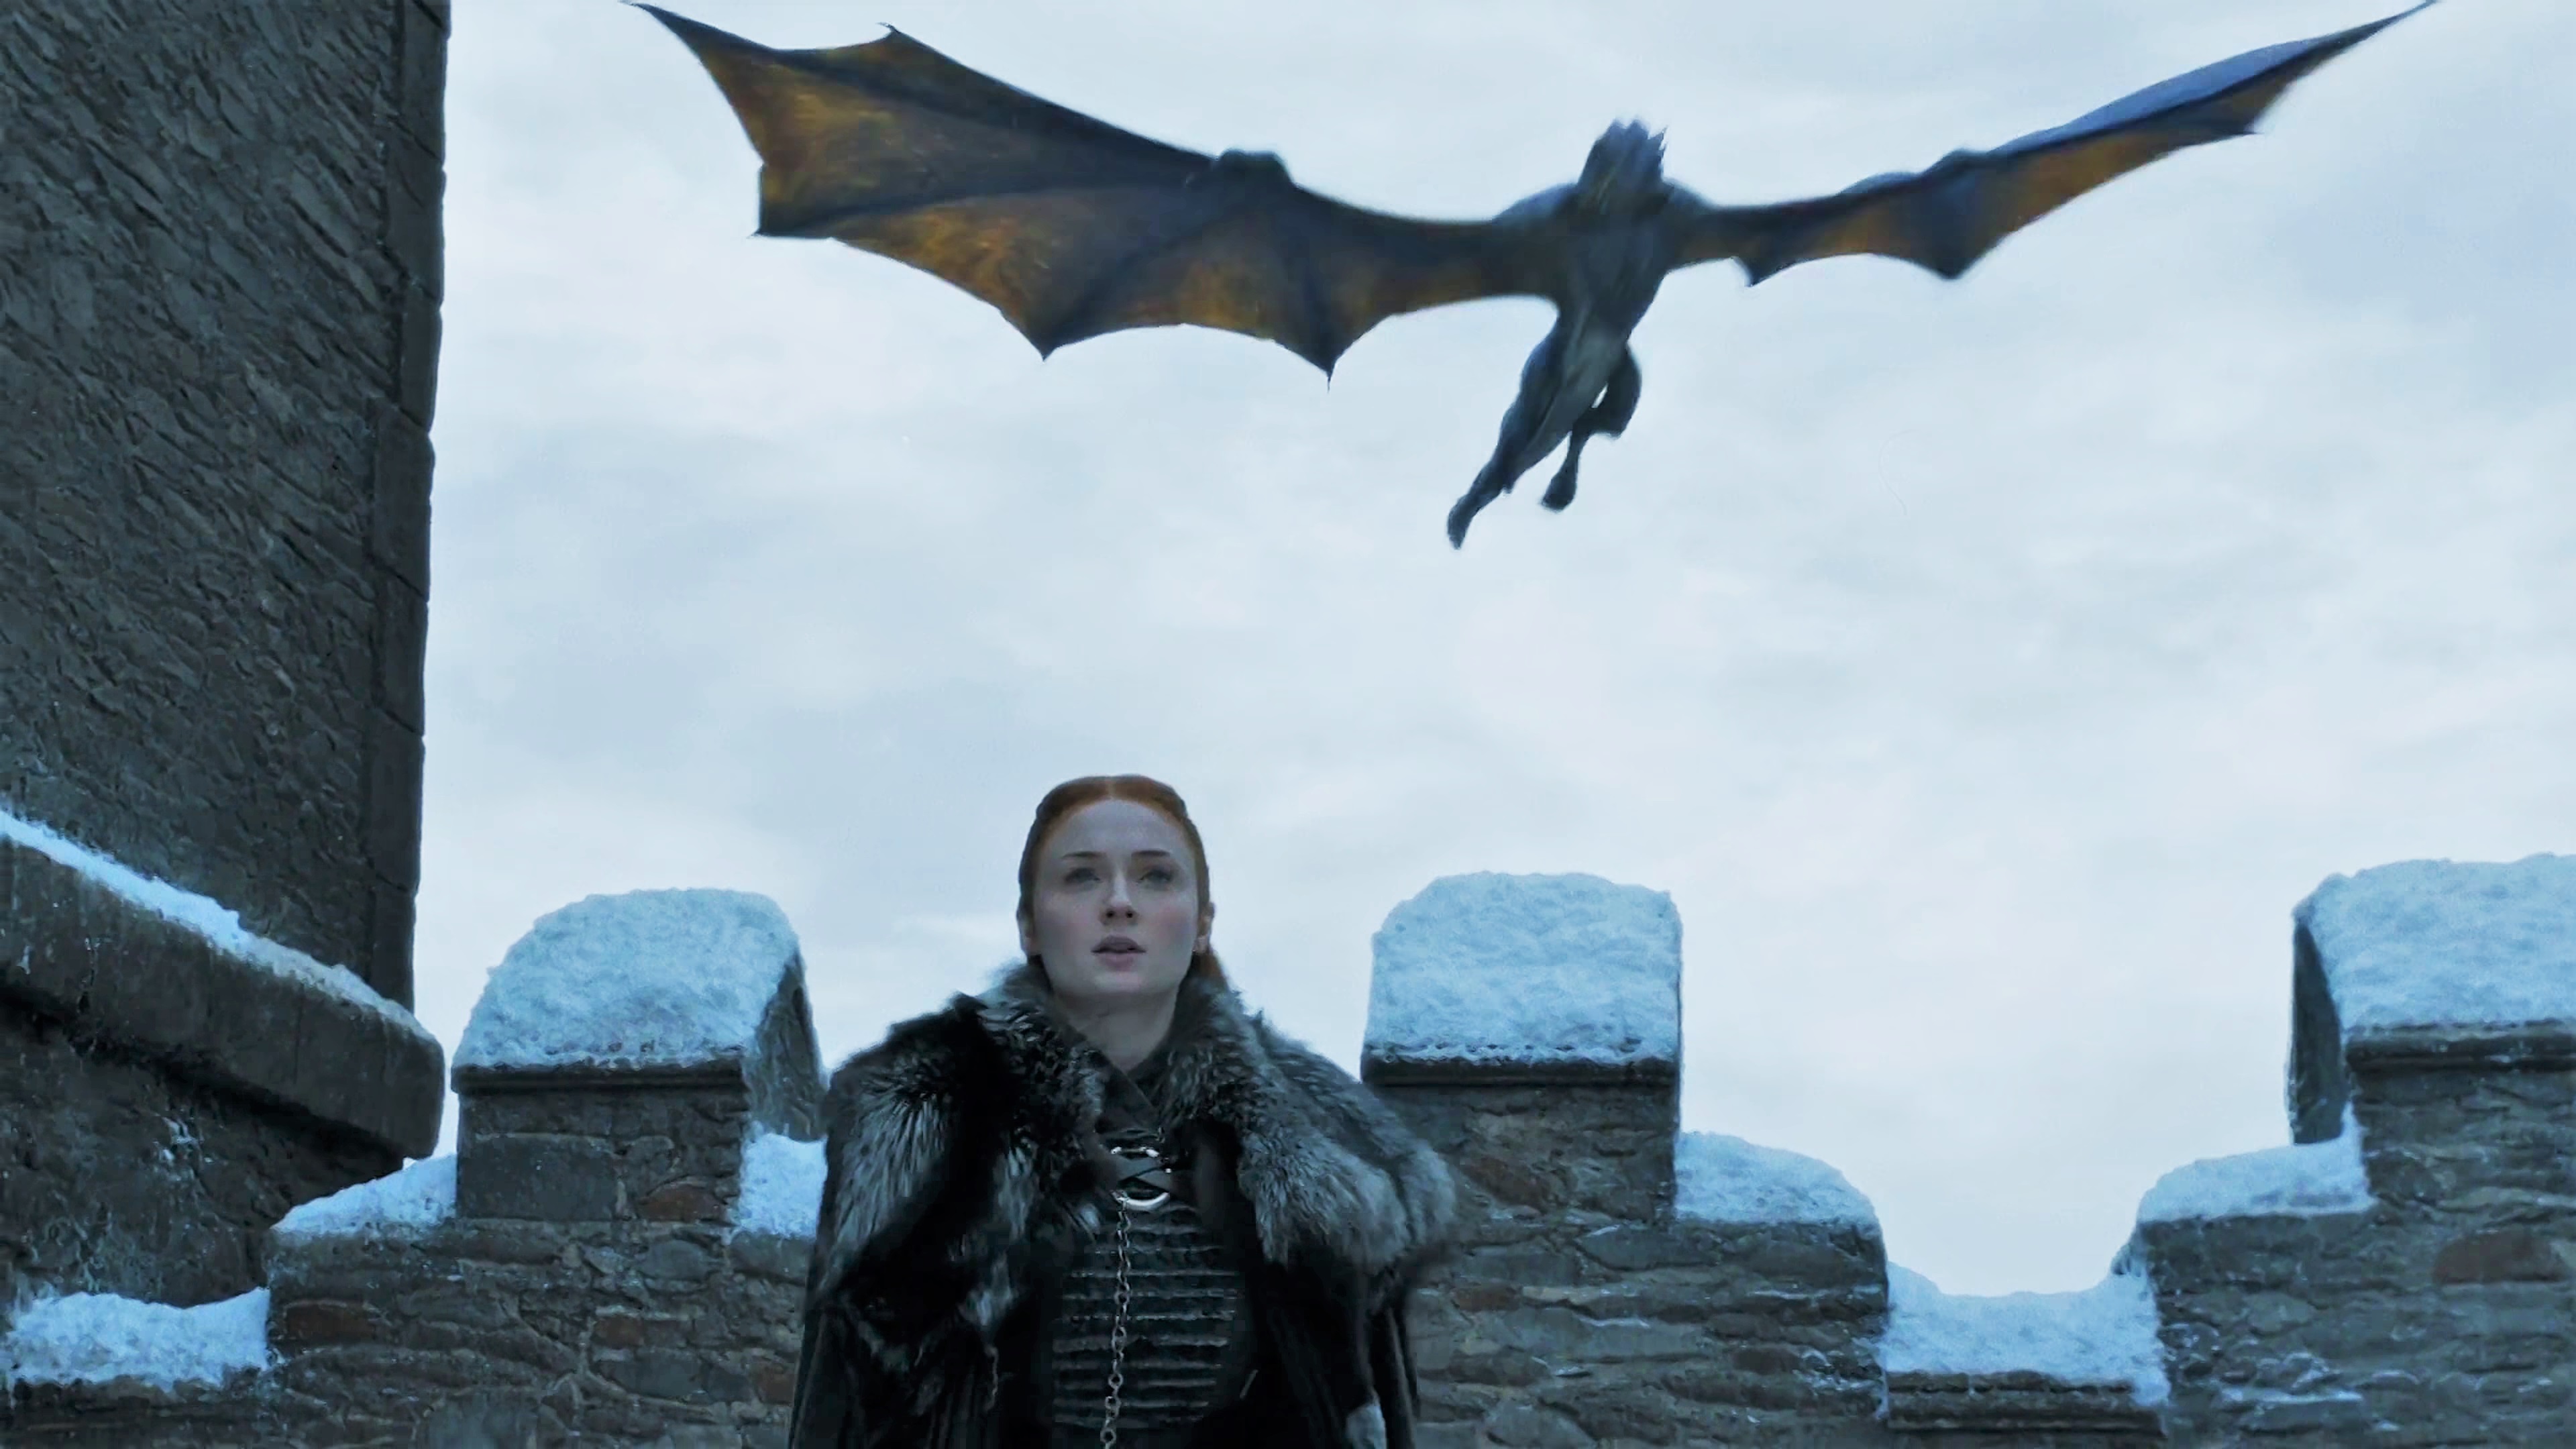 Jessica R. reccomend you know want more drogon